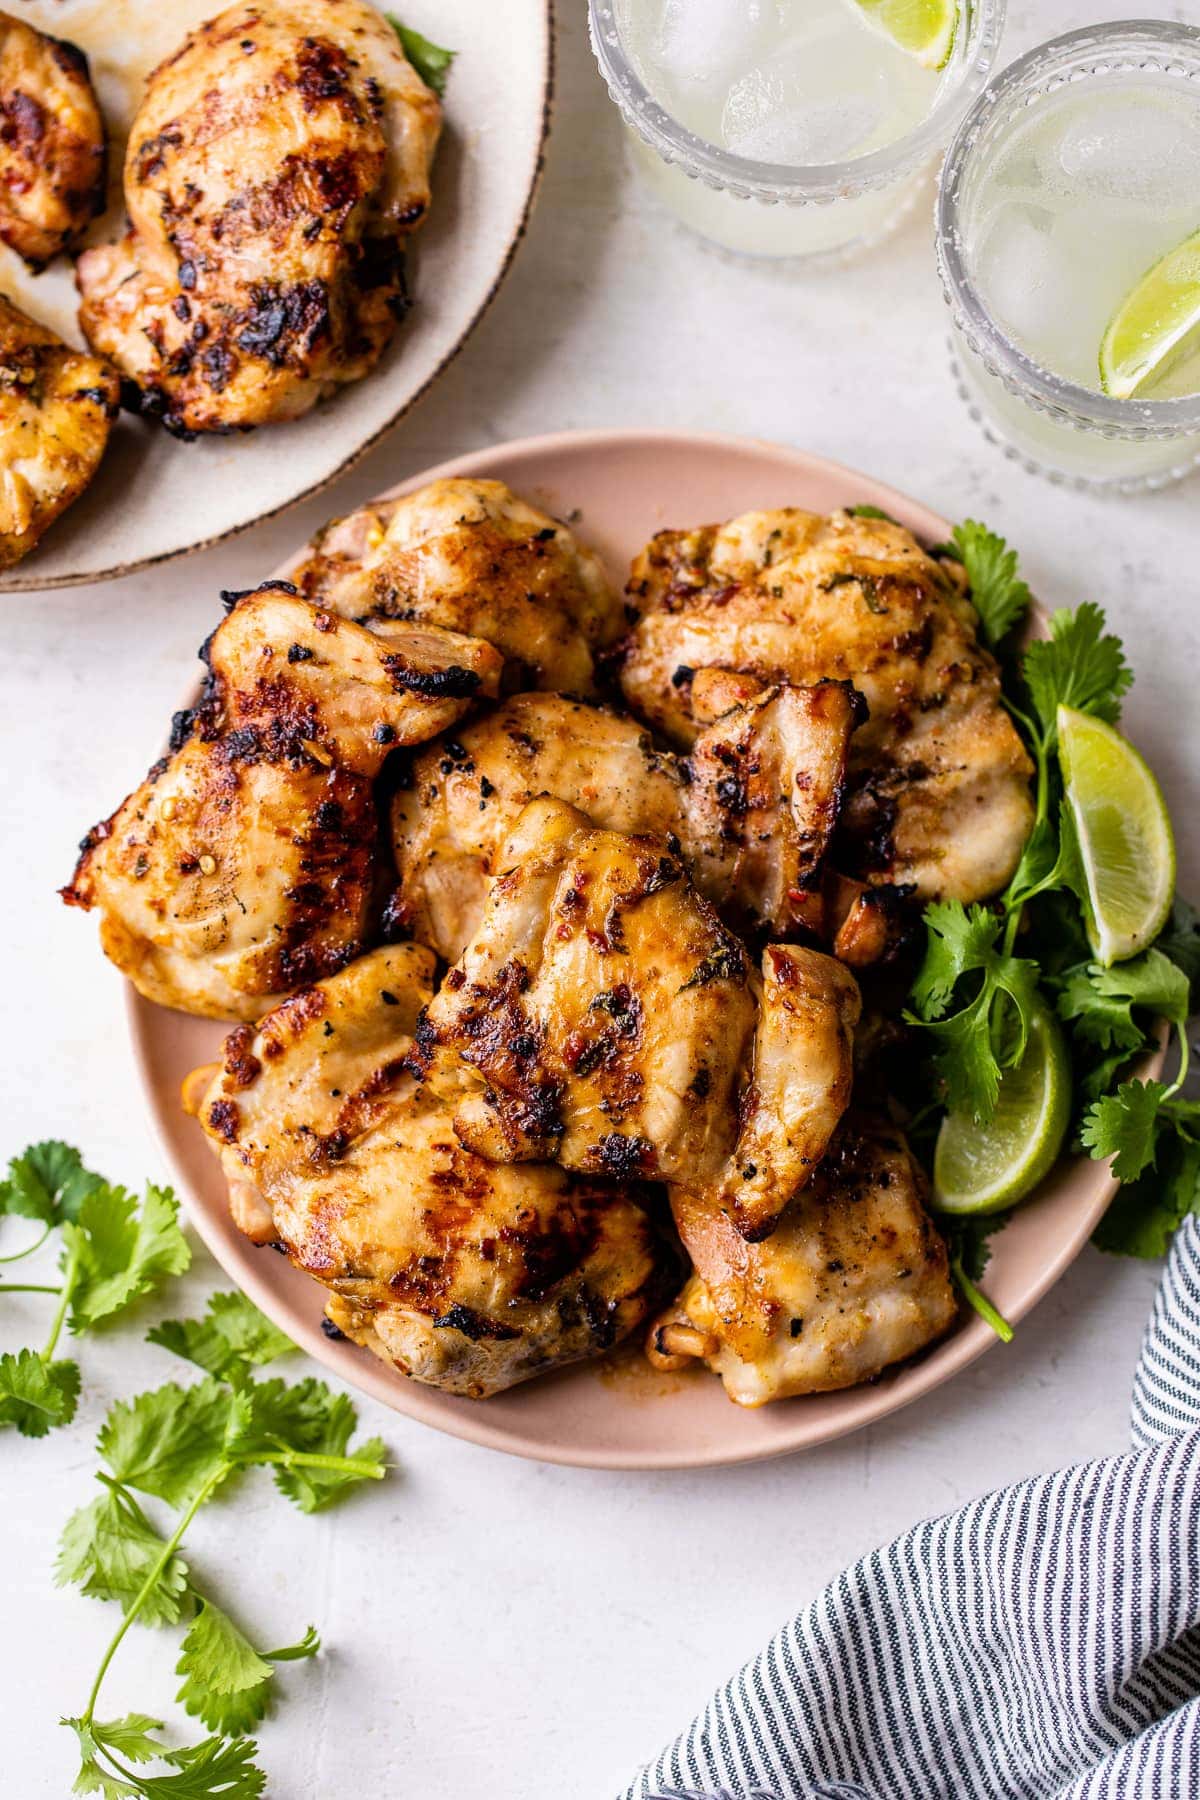 Lime chicken marinated thighs on a plate ready to eat.